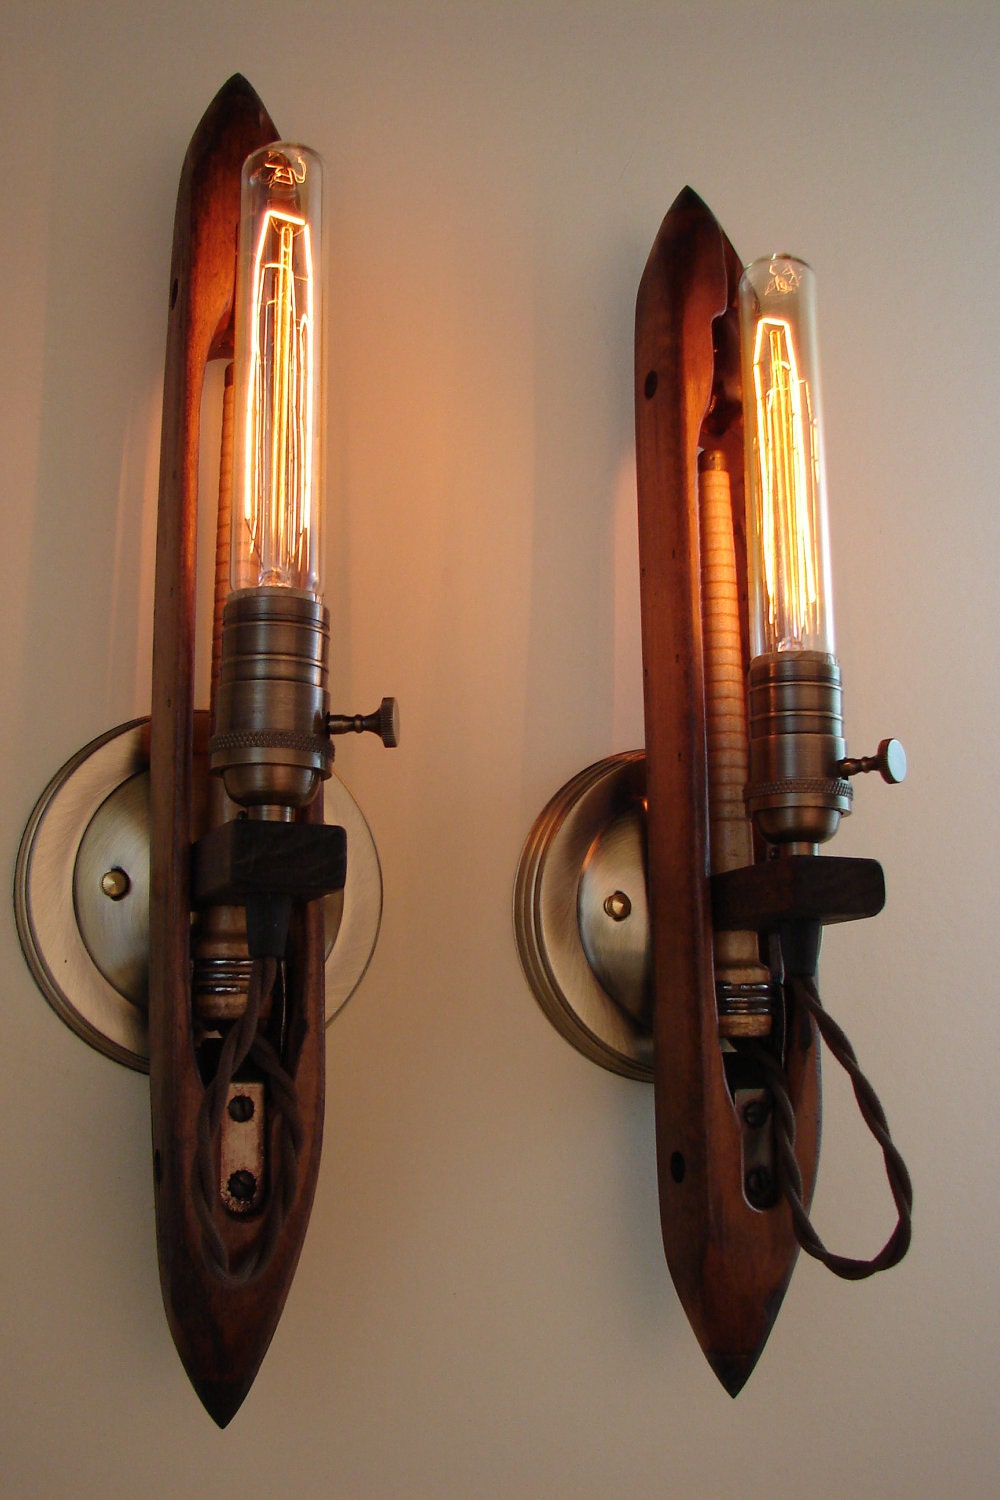 Industrial Wall Light Sconce - BenclifDesigns